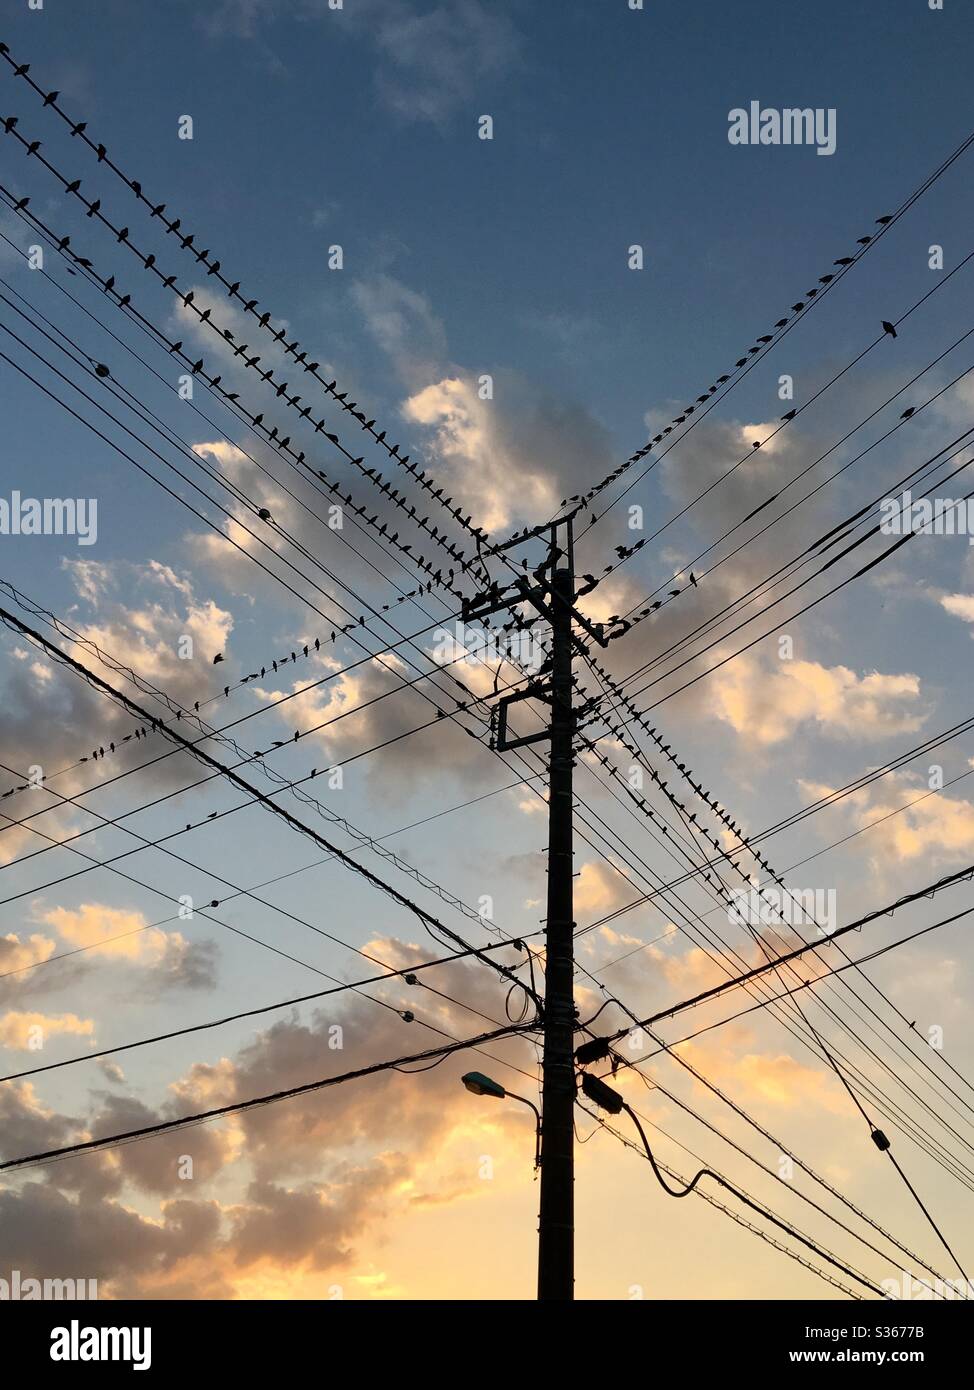 Birds resting on power lines at sunset in Narita Japan Stock Photo